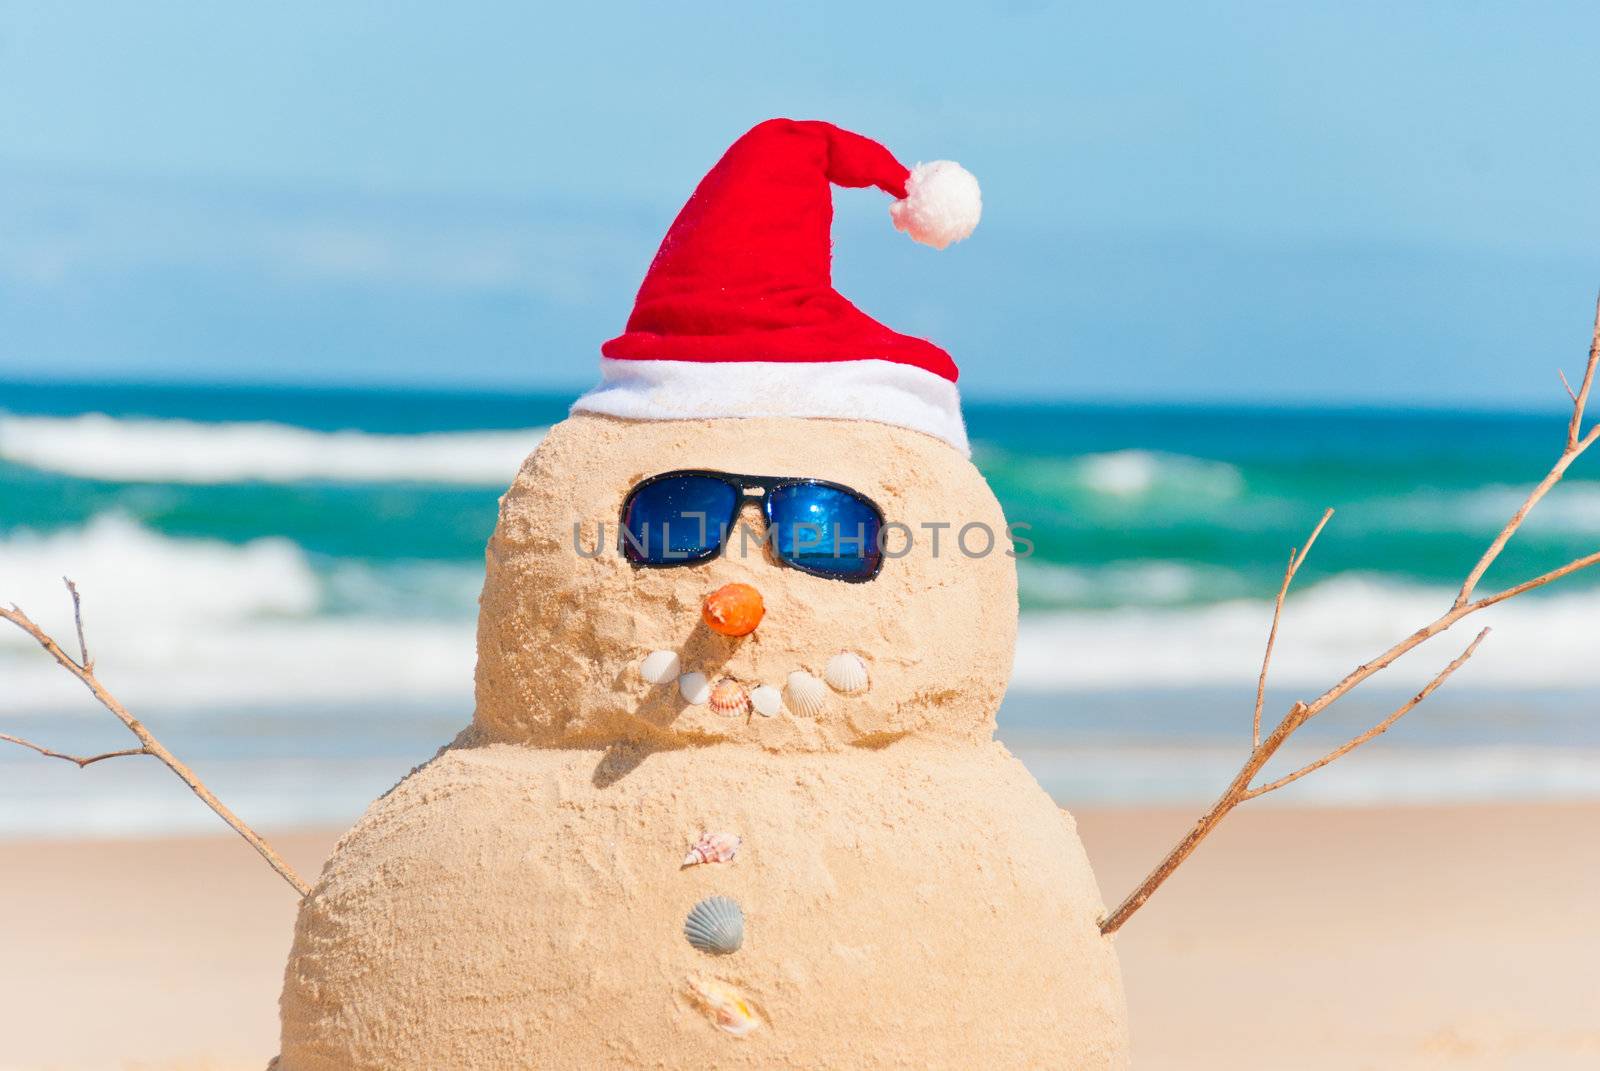 Snowman Made Out Of Sand With Santa Hat by KonArt